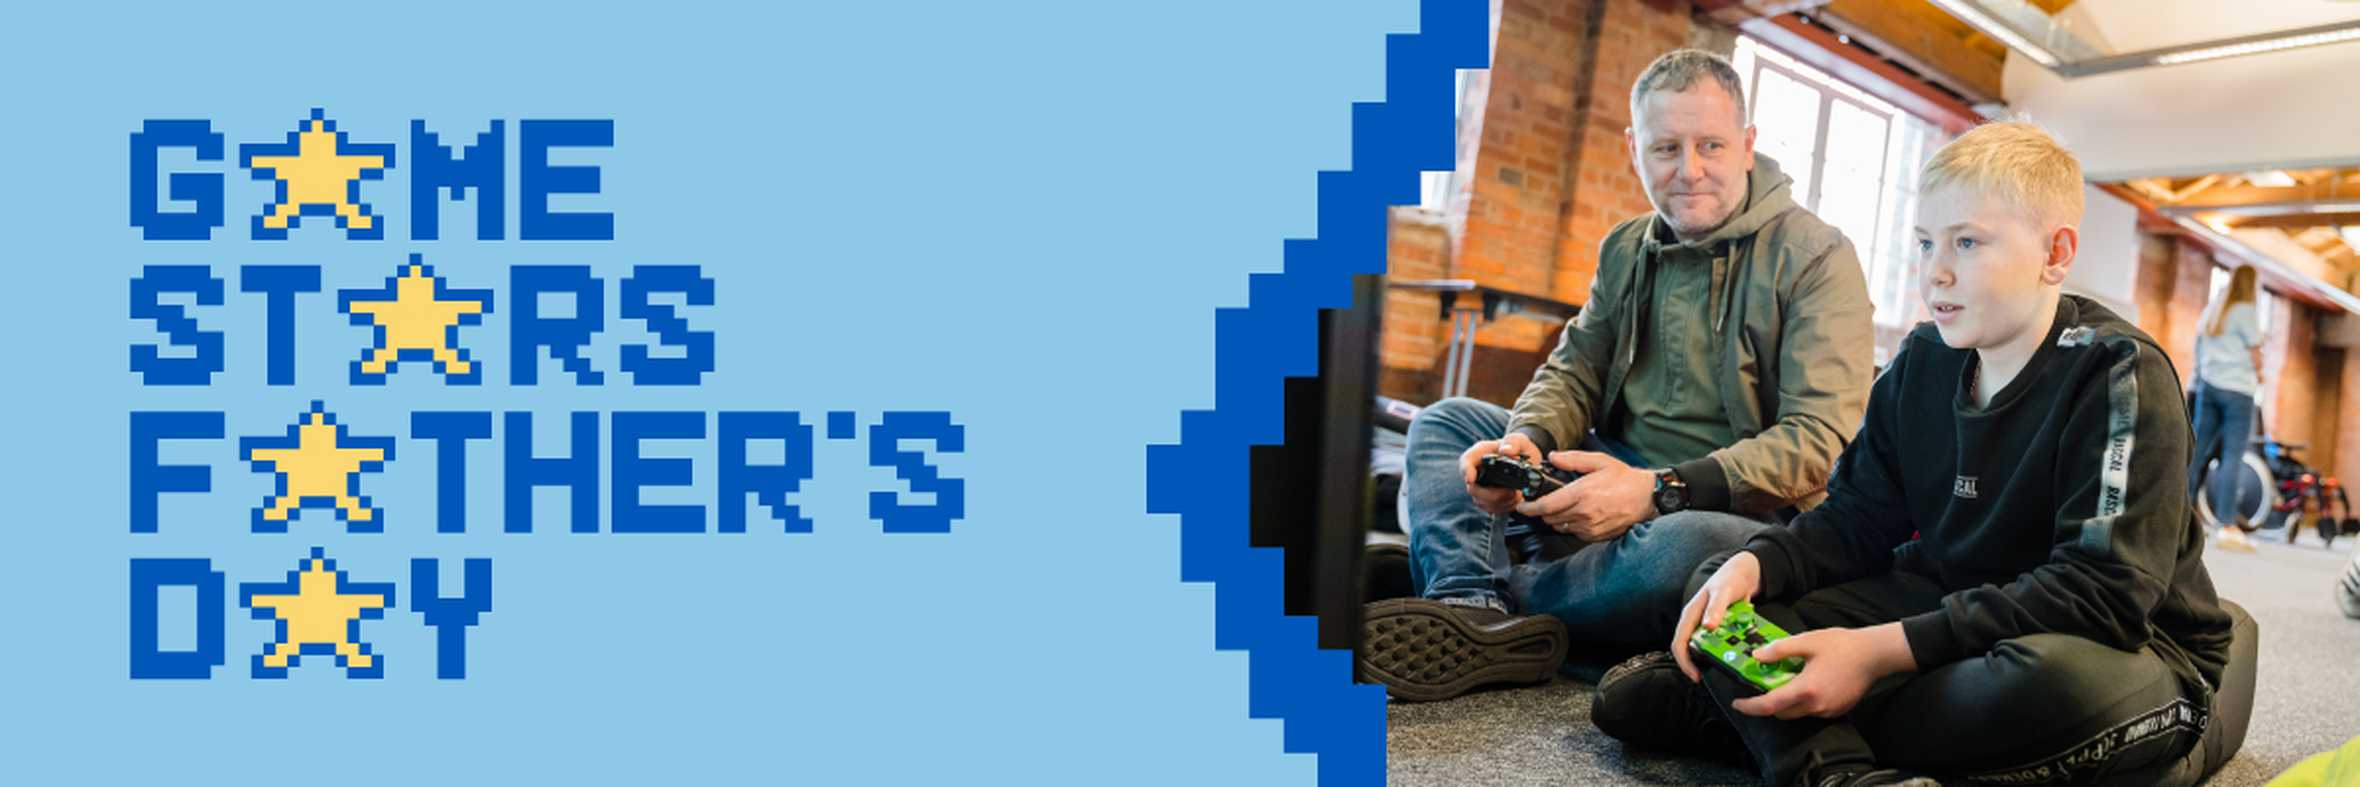 8-bit style banner with GameStars Father's Day logo and a picture of wish child, Mason playing videos games with his dad.